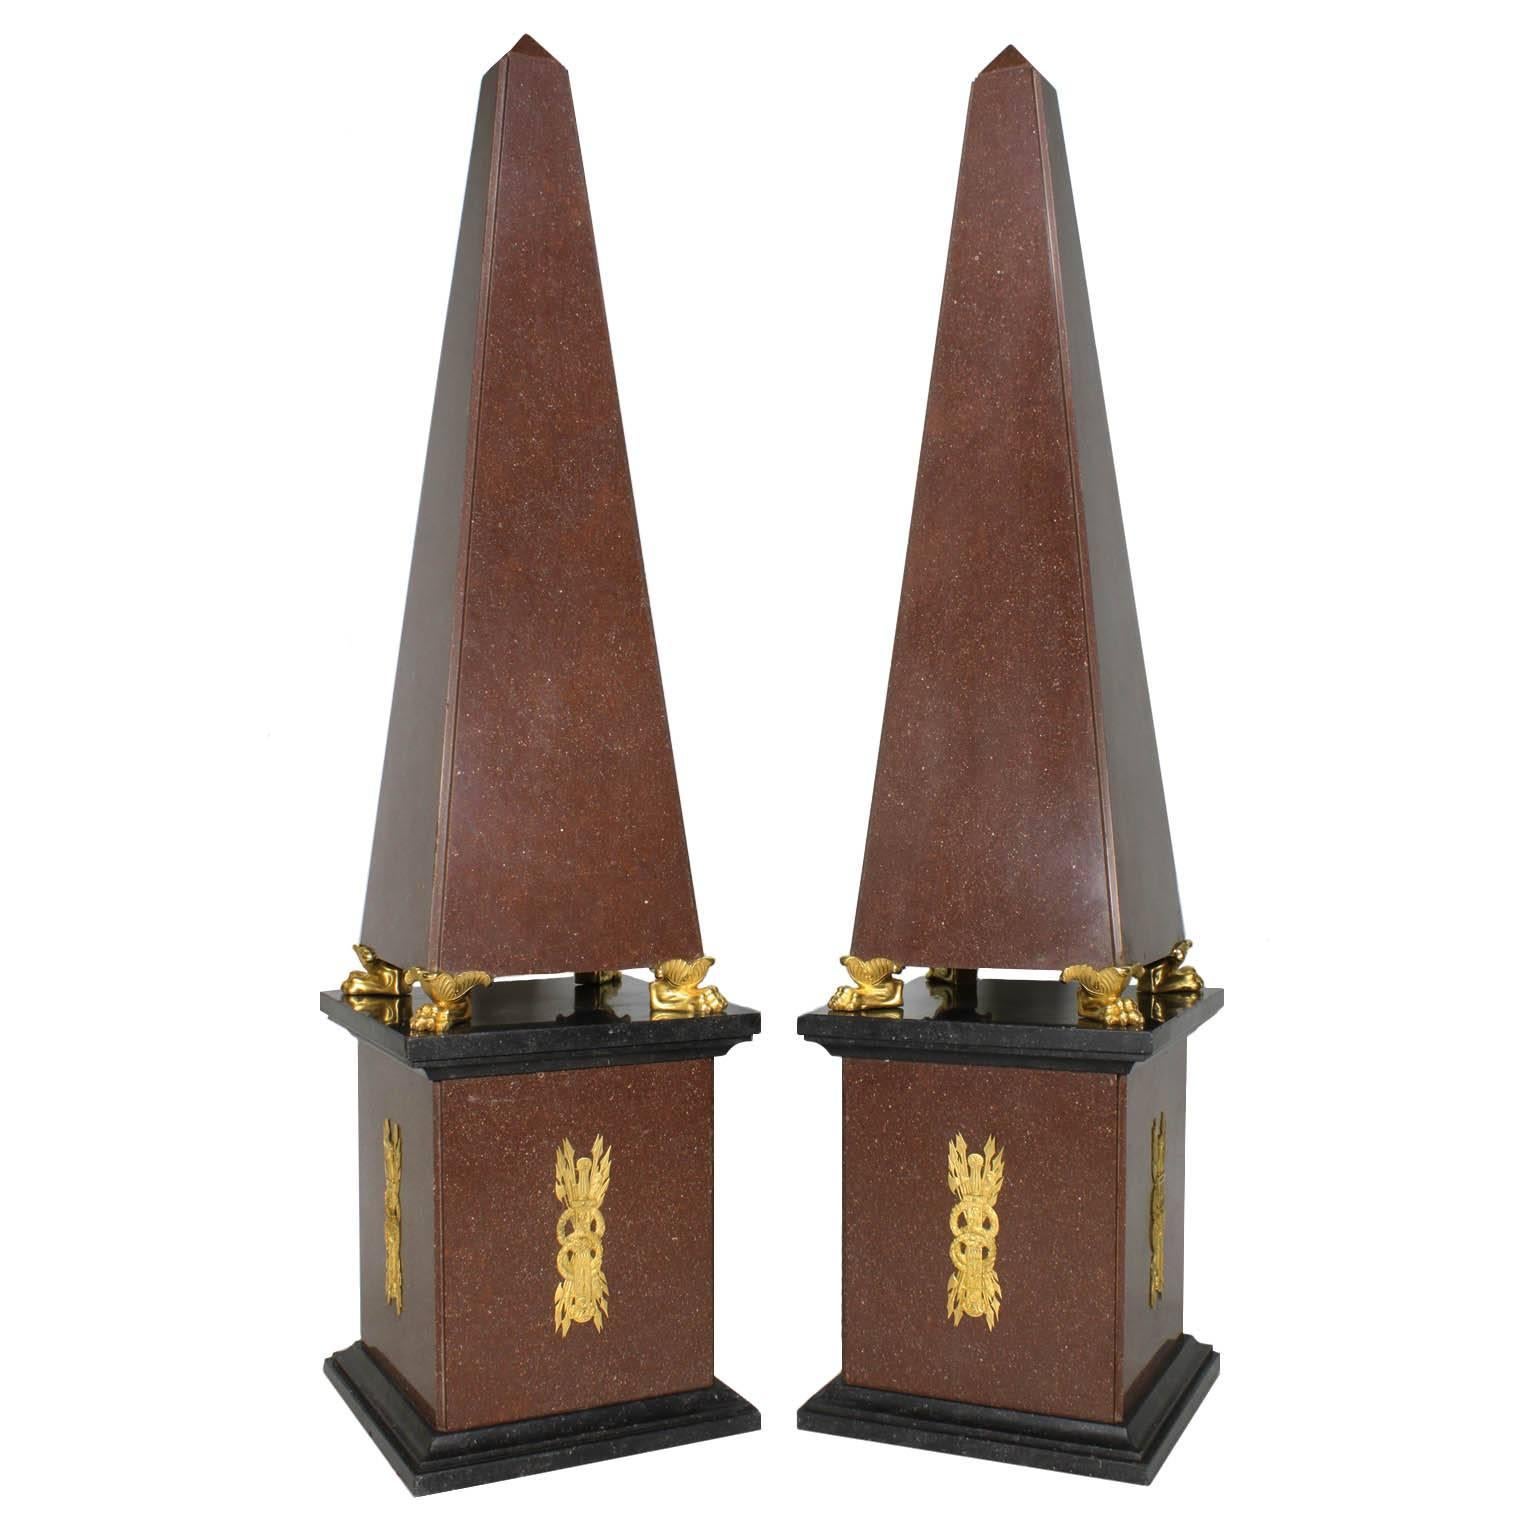 Pair French Empire 19th-20th Century Red Porphyry-Like Granite & Ormolu Obelisks For Sale